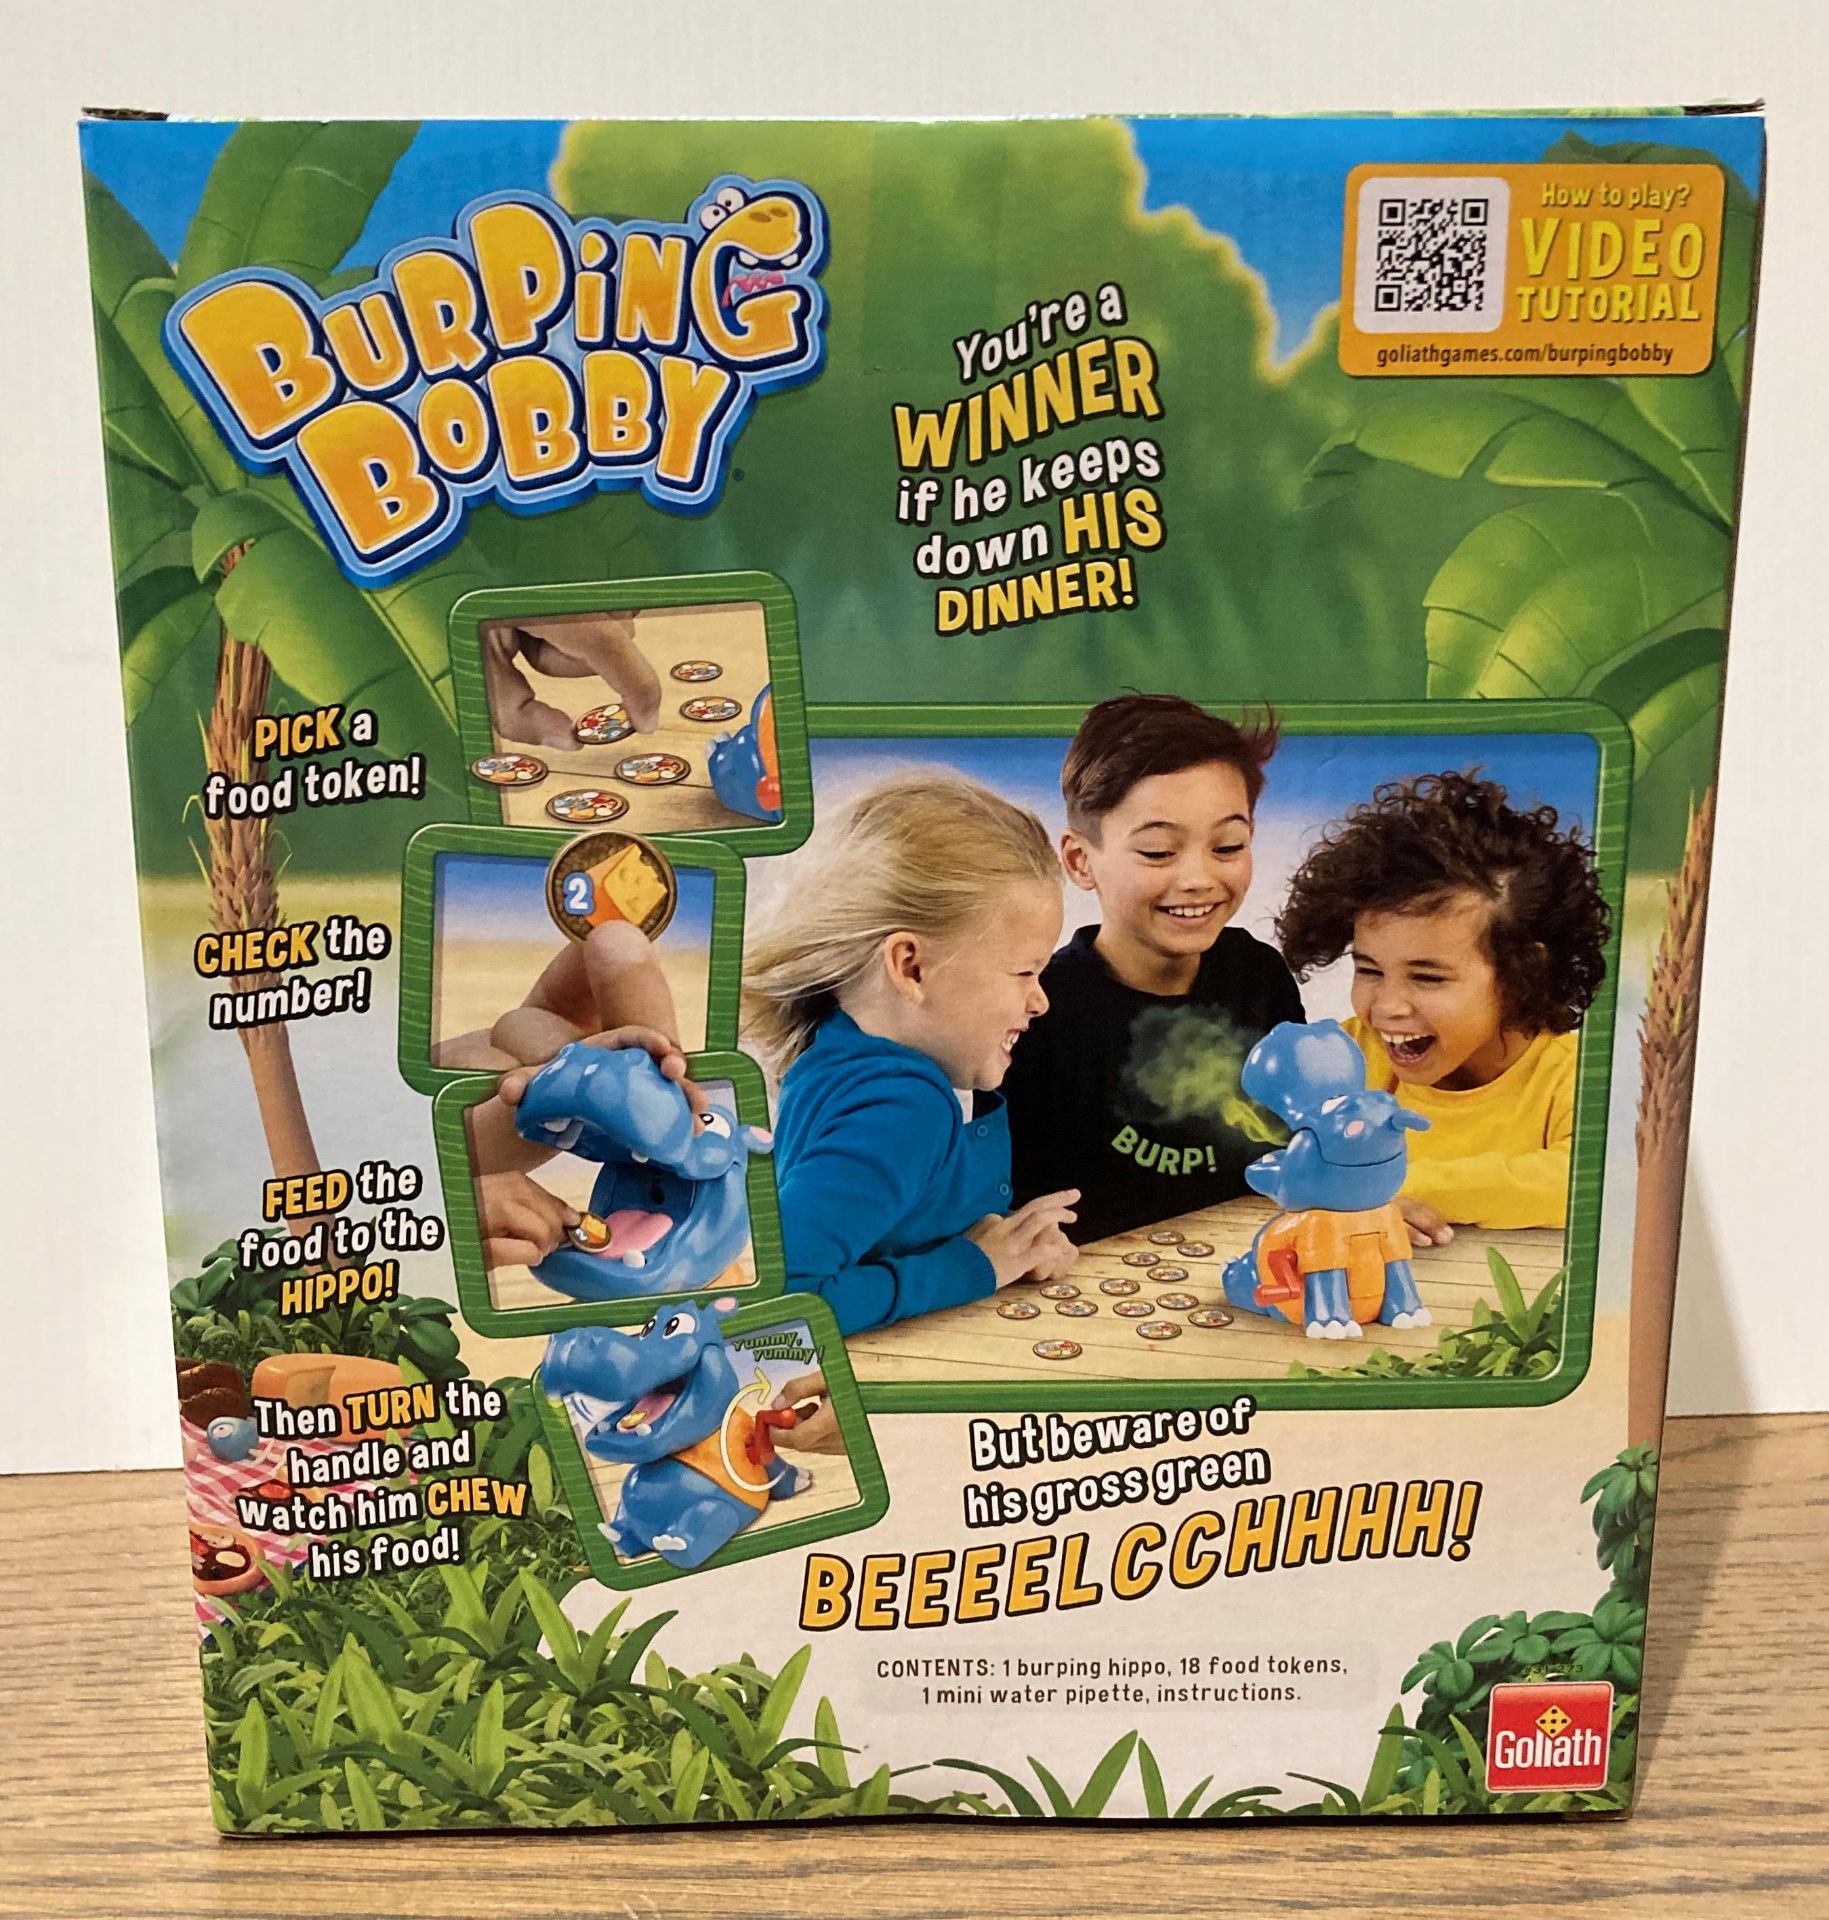 24 x Burping Bobby games RRP £23 each(4 x outer boxes) (saleroom location: end D/E aisle) - Image 2 of 4